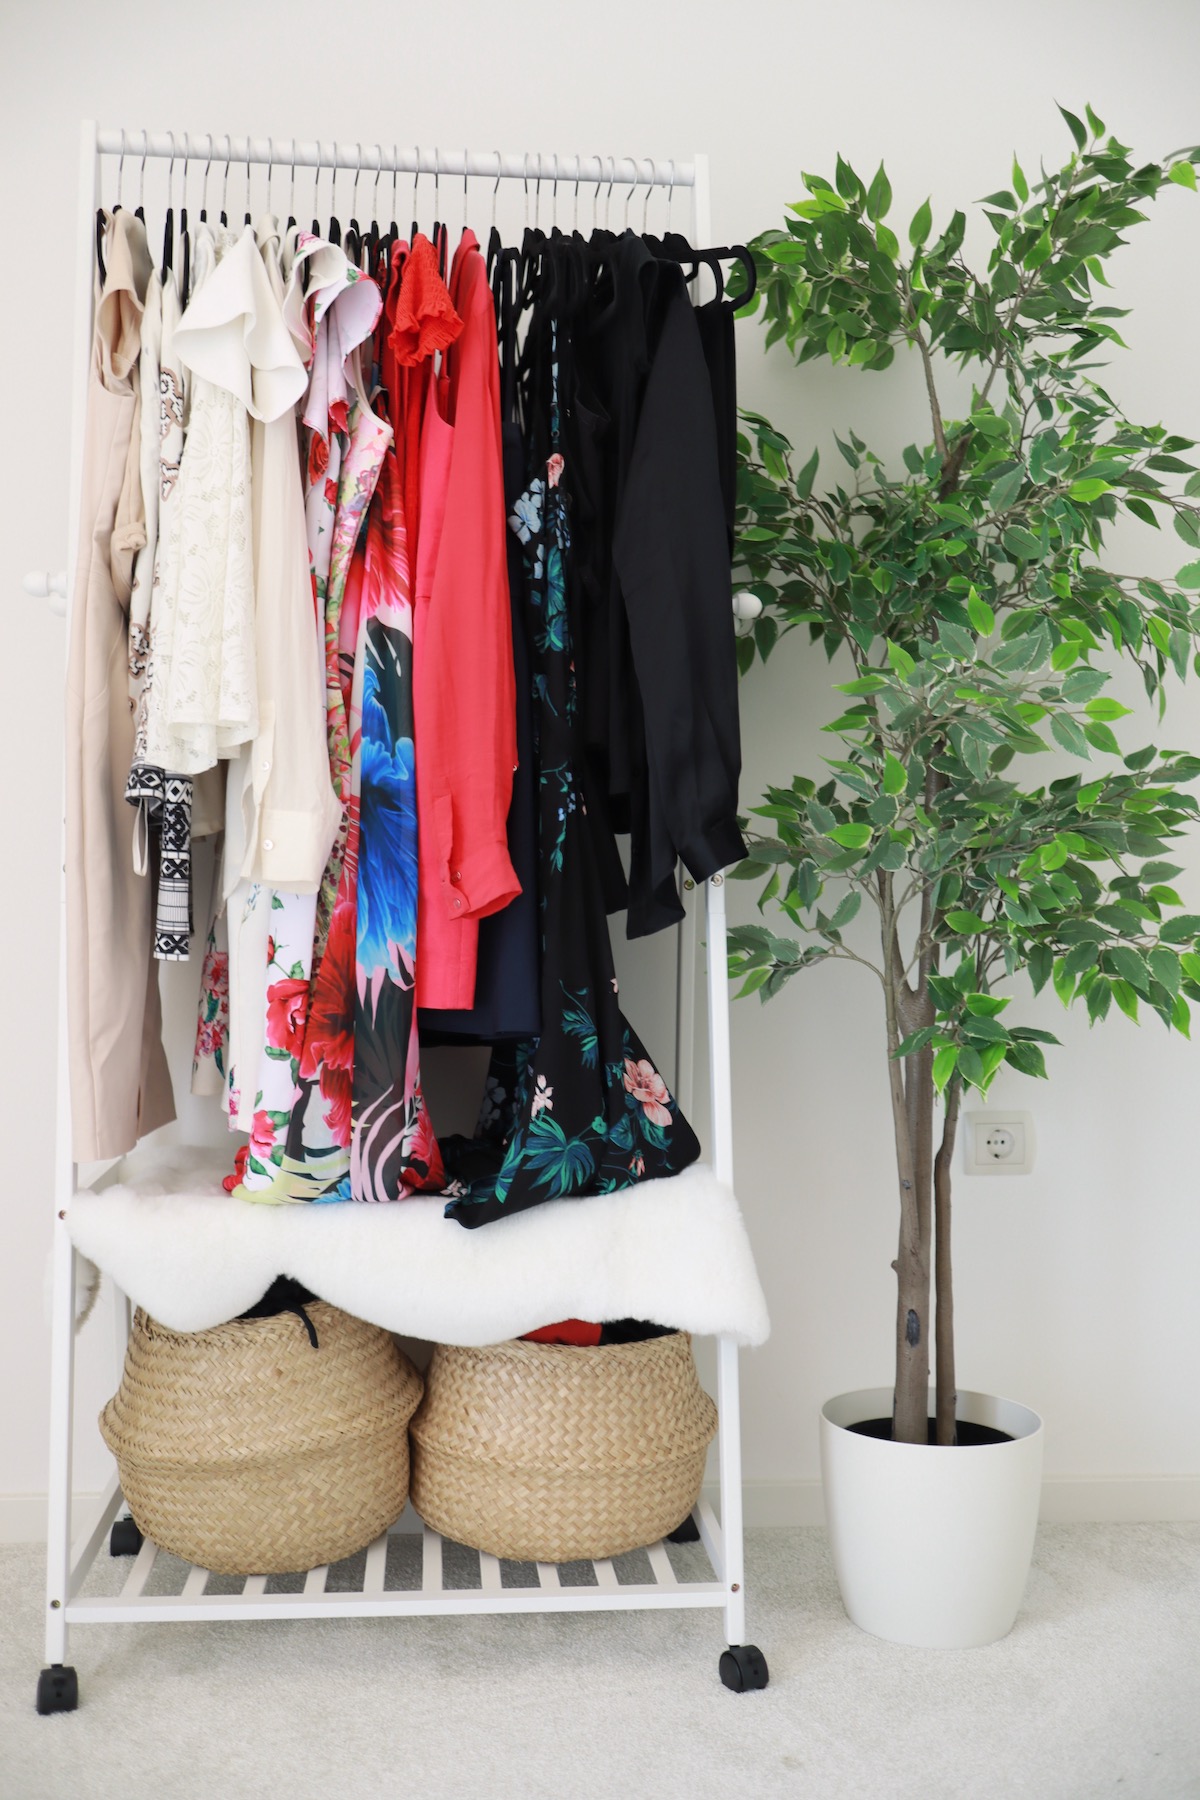 Easy Closet Hack to Save Space & Simplify: Matching Hangers - Pursuit of  Simple